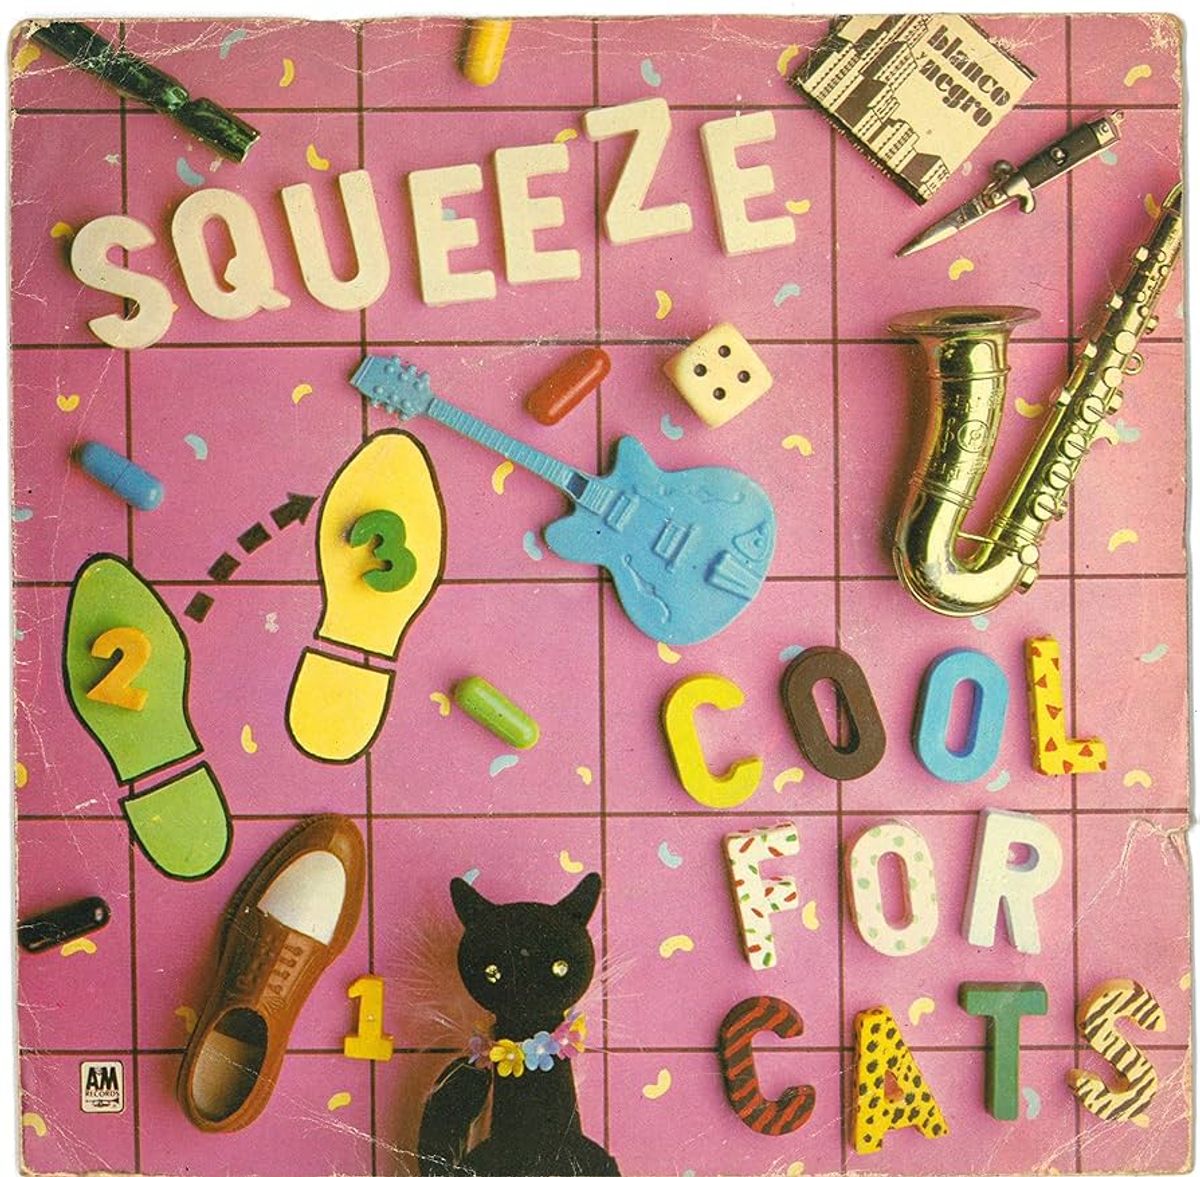 #KatInEenZak - Squeeze - Cool For Cats (1979)